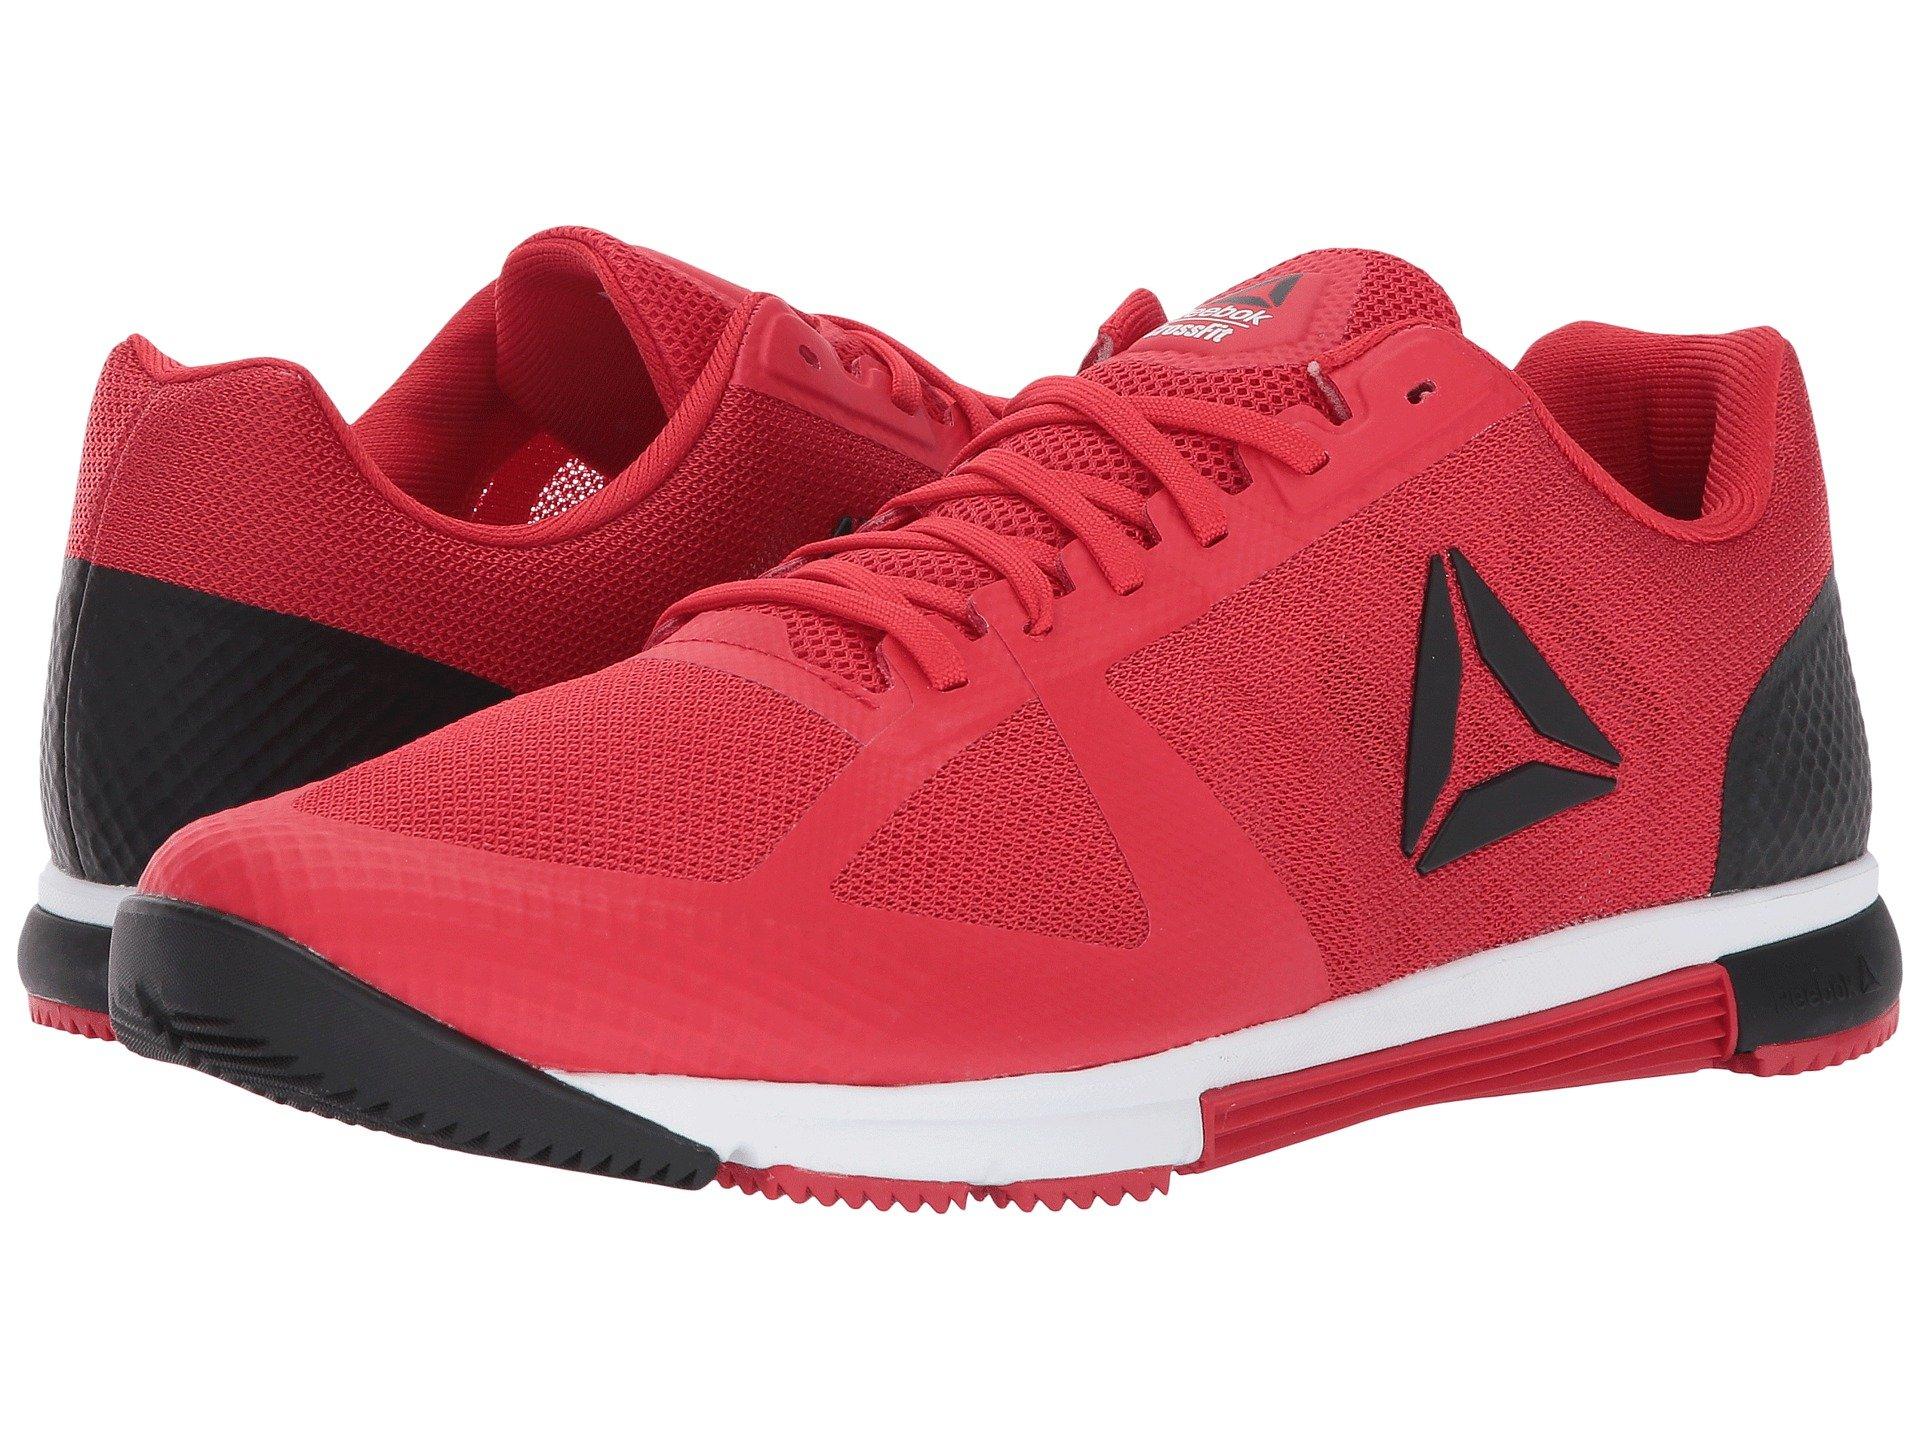 speed tr 2.0 reebok Shop Clothing & Shoes Online